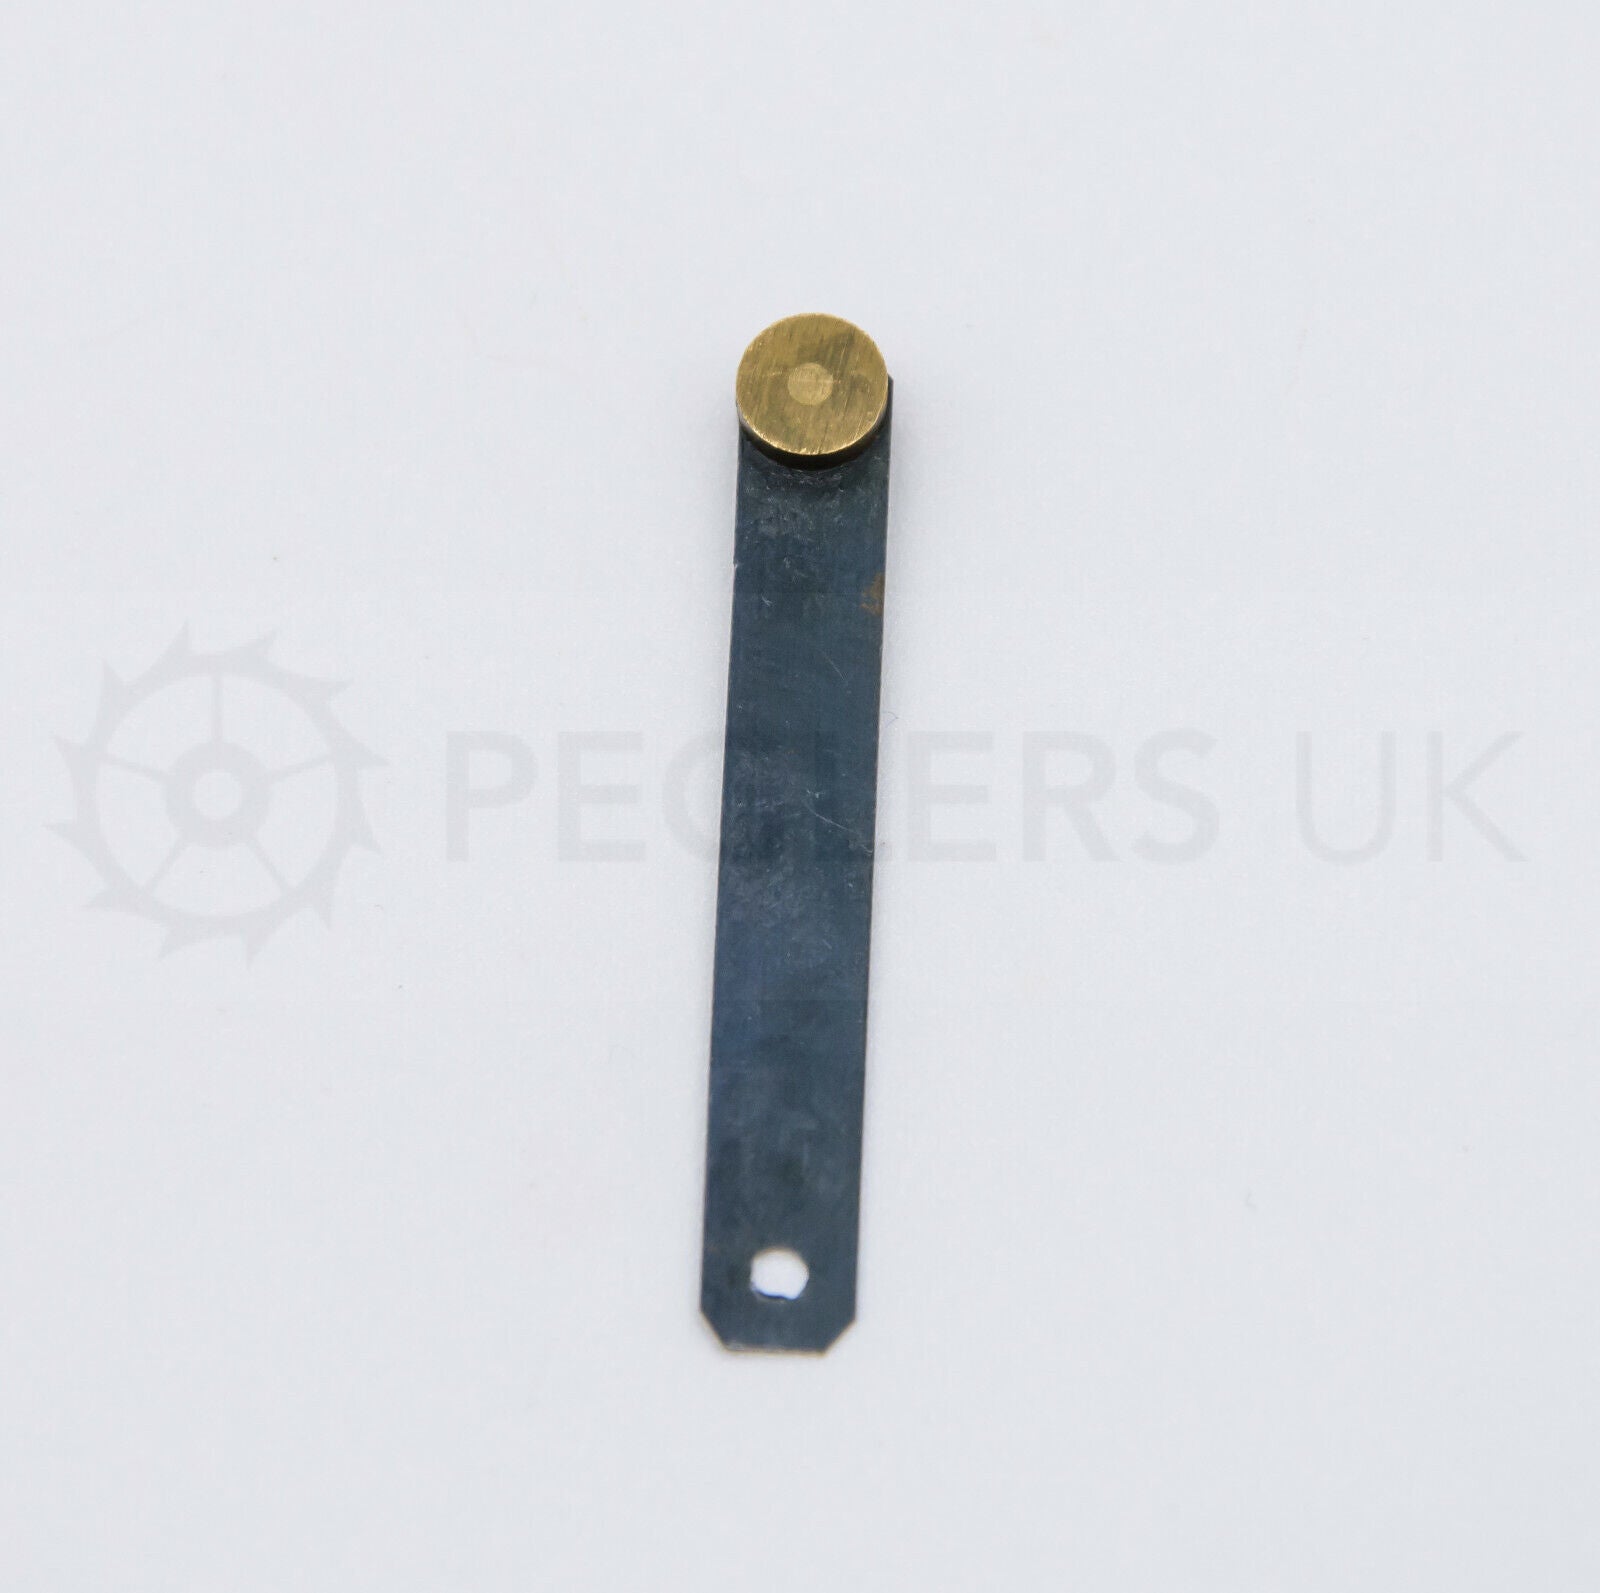 Suspension Spring for English Dial Fusee Clock